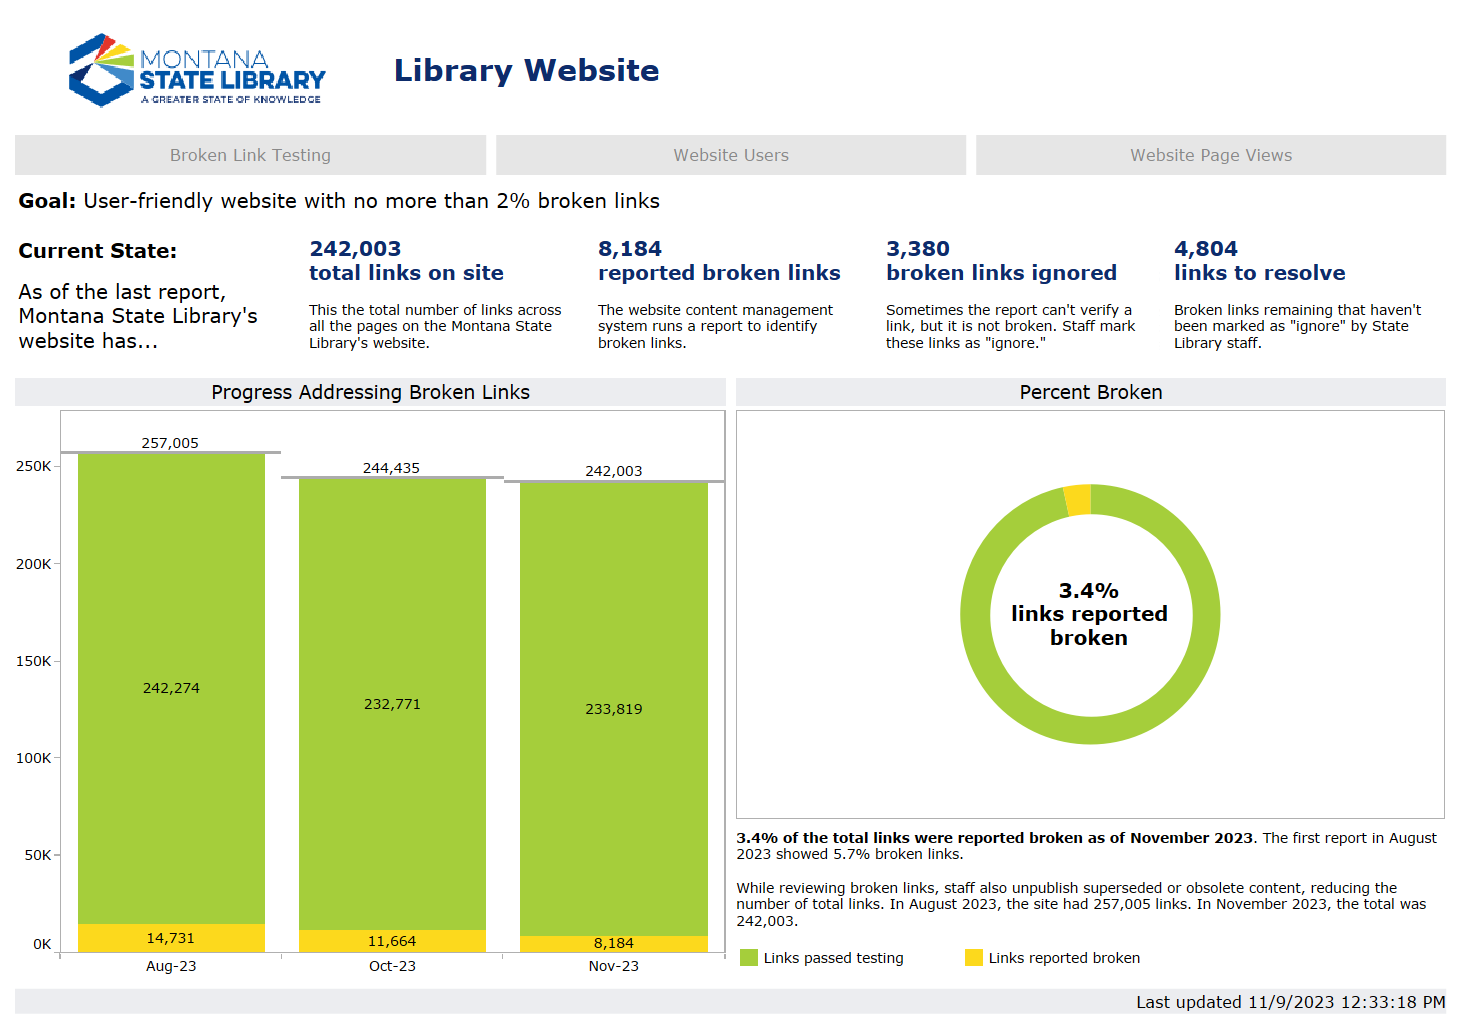 Screenshot of the Library website dashboard